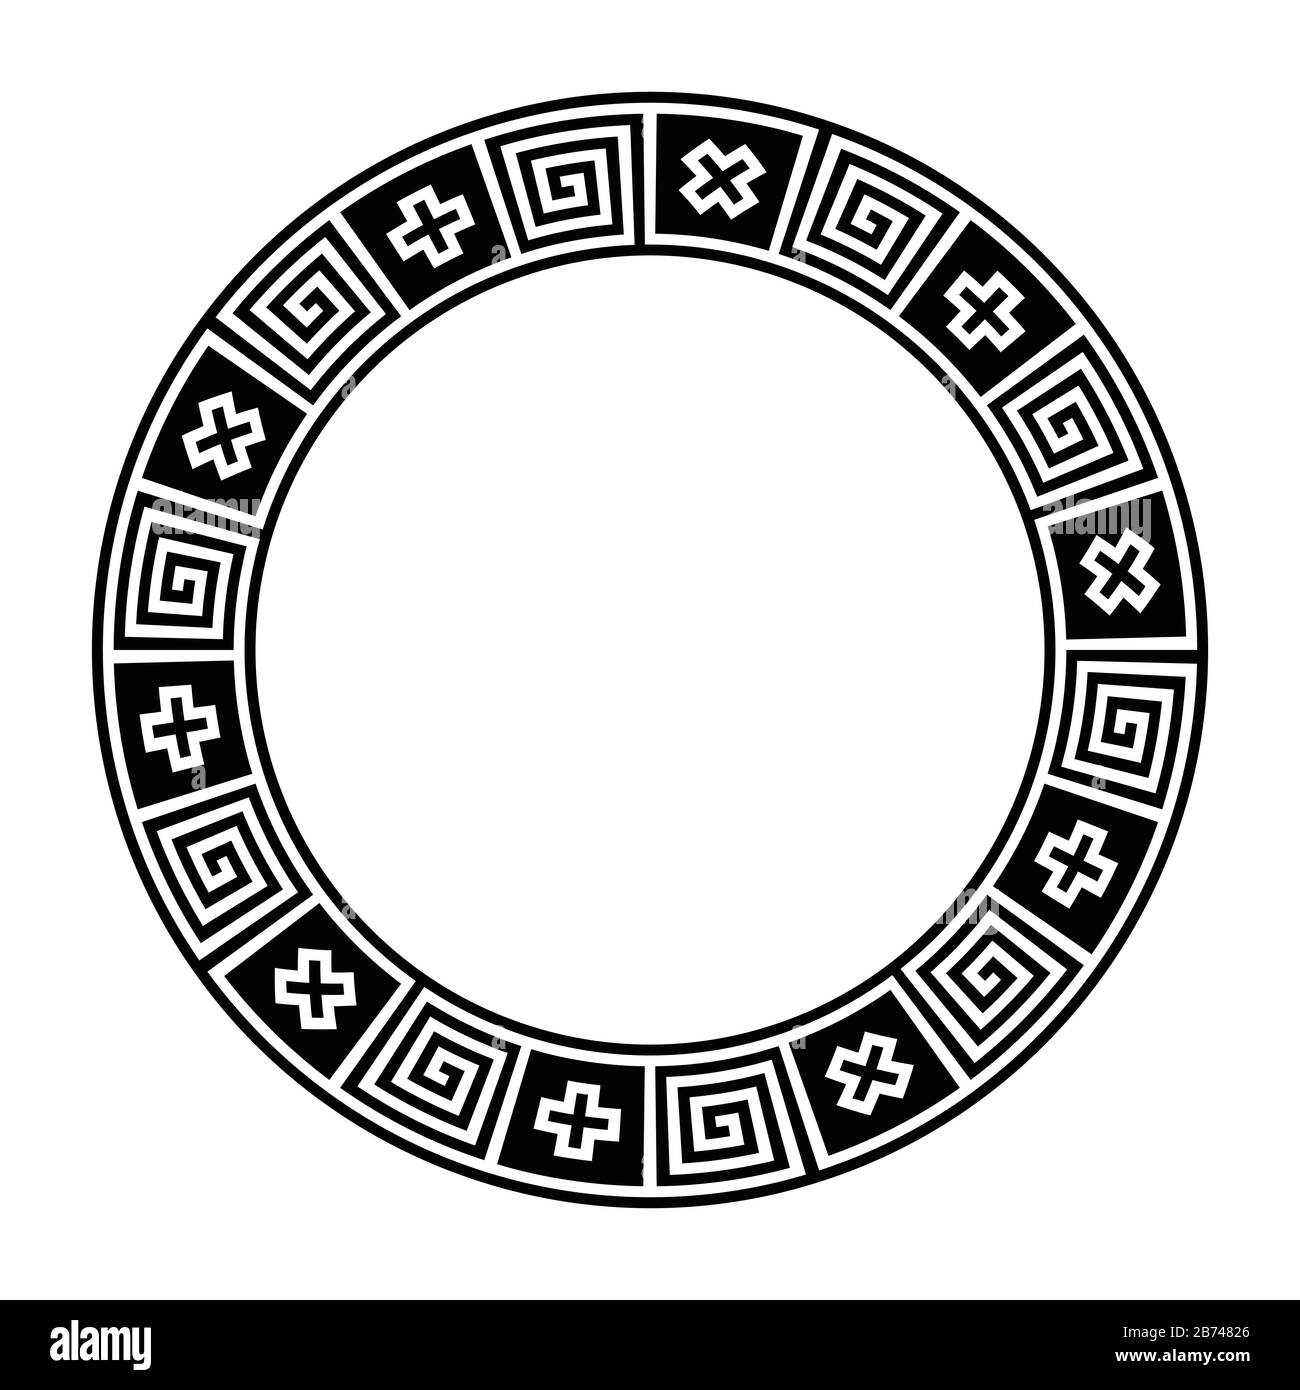 Classical Greek meander, circle frame, made of seamless meander pattern. Decorative border with meanders and crosses in black squares. Greek key. Stock Photo